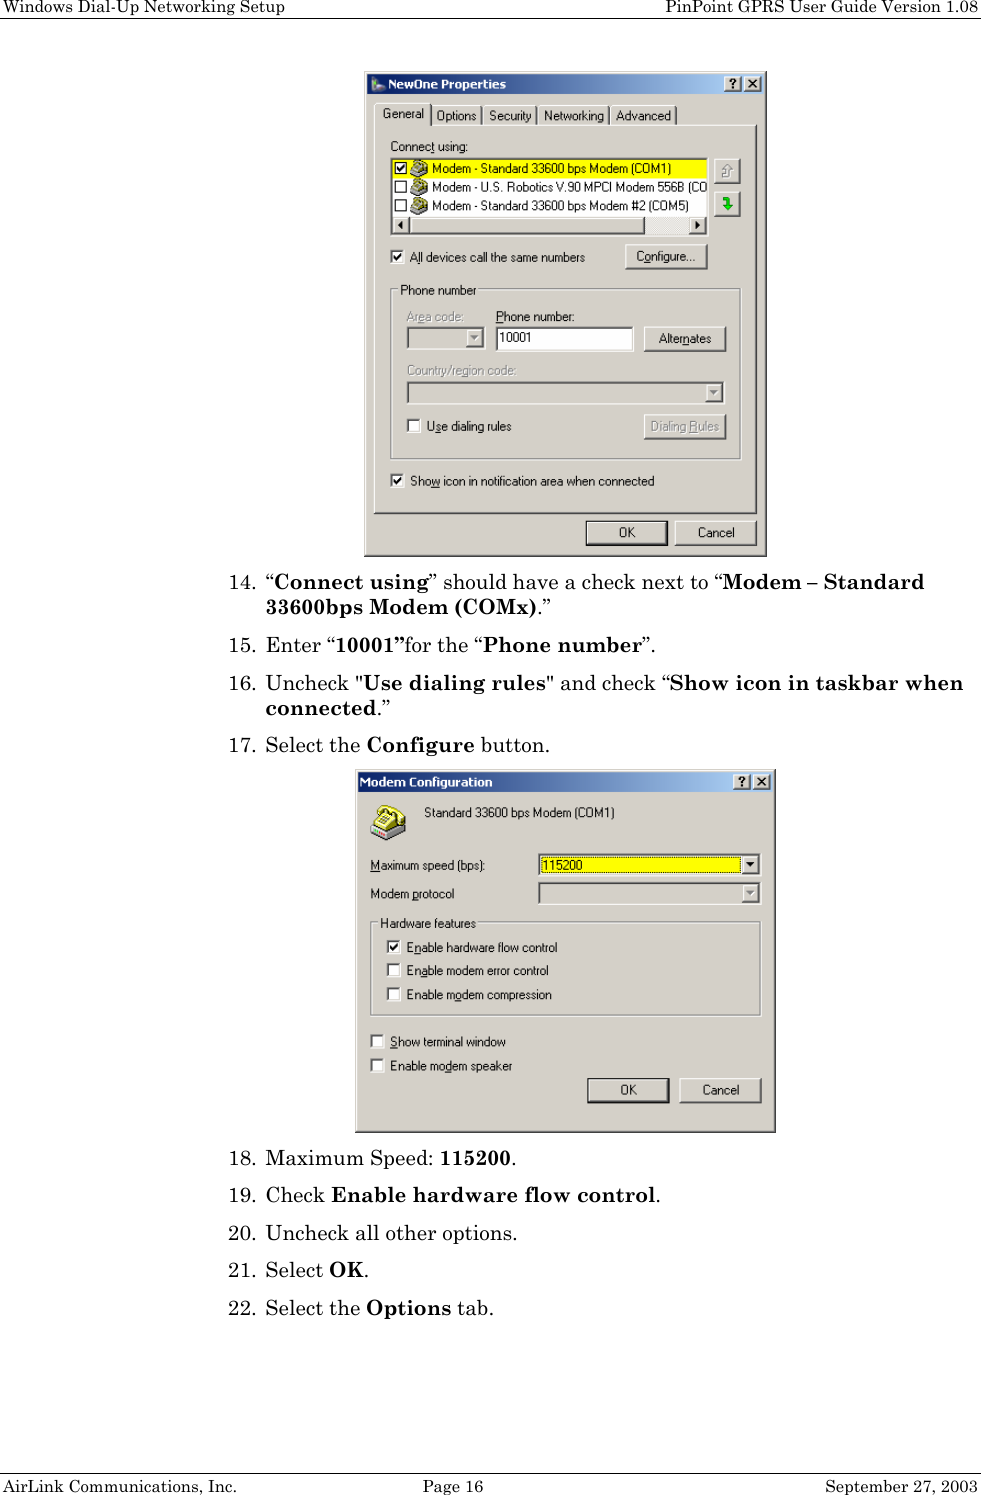 Windows Dial-Up Networking Setup    PinPoint GPRS User Guide Version 1.08 AirLink Communications, Inc.  Page 16  September 27, 2003  14. “Connect using” should have a check next to “Modem – Standard 33600bps Modem (COMx).” 15. Enter “10001”for the “Phone number”. 16. Uncheck &quot;Use dialing rules&quot; and check “Show icon in taskbar when connected.” 17. Select the Configure button.  18. Maximum Speed: 115200. 19. Check Enable hardware flow control. 20. Uncheck all other options. 21. Select OK. 22. Select the Options tab. 